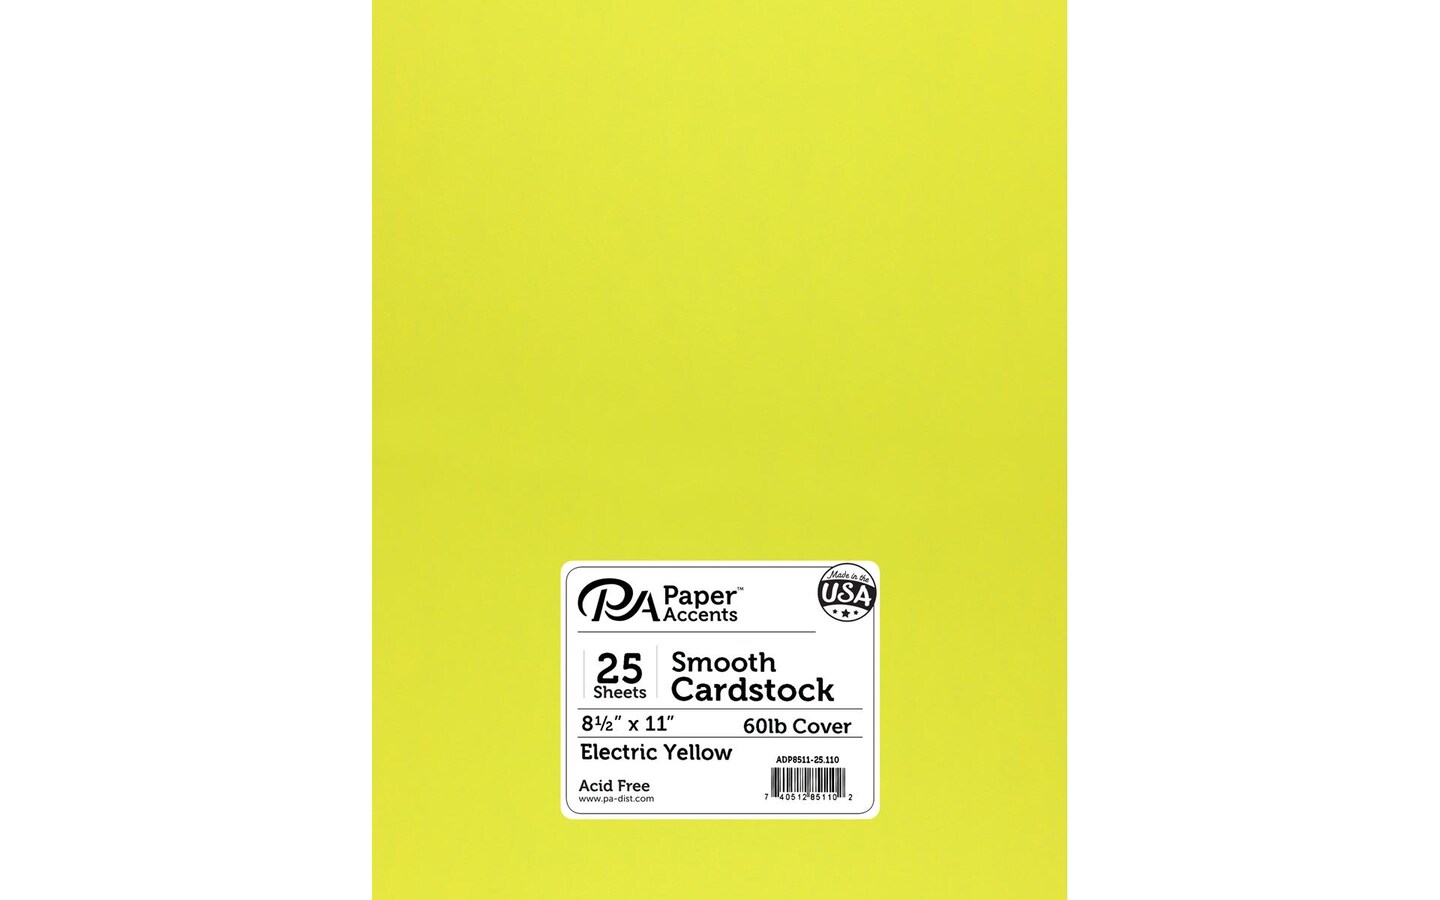 PA Paper Accents Smooth Cardstock 8.5 x 11 Electric Yellow, 65lb colored cardstock  paper for card making, scrapbooking, printing, quilling and crafts, 25  piece pack